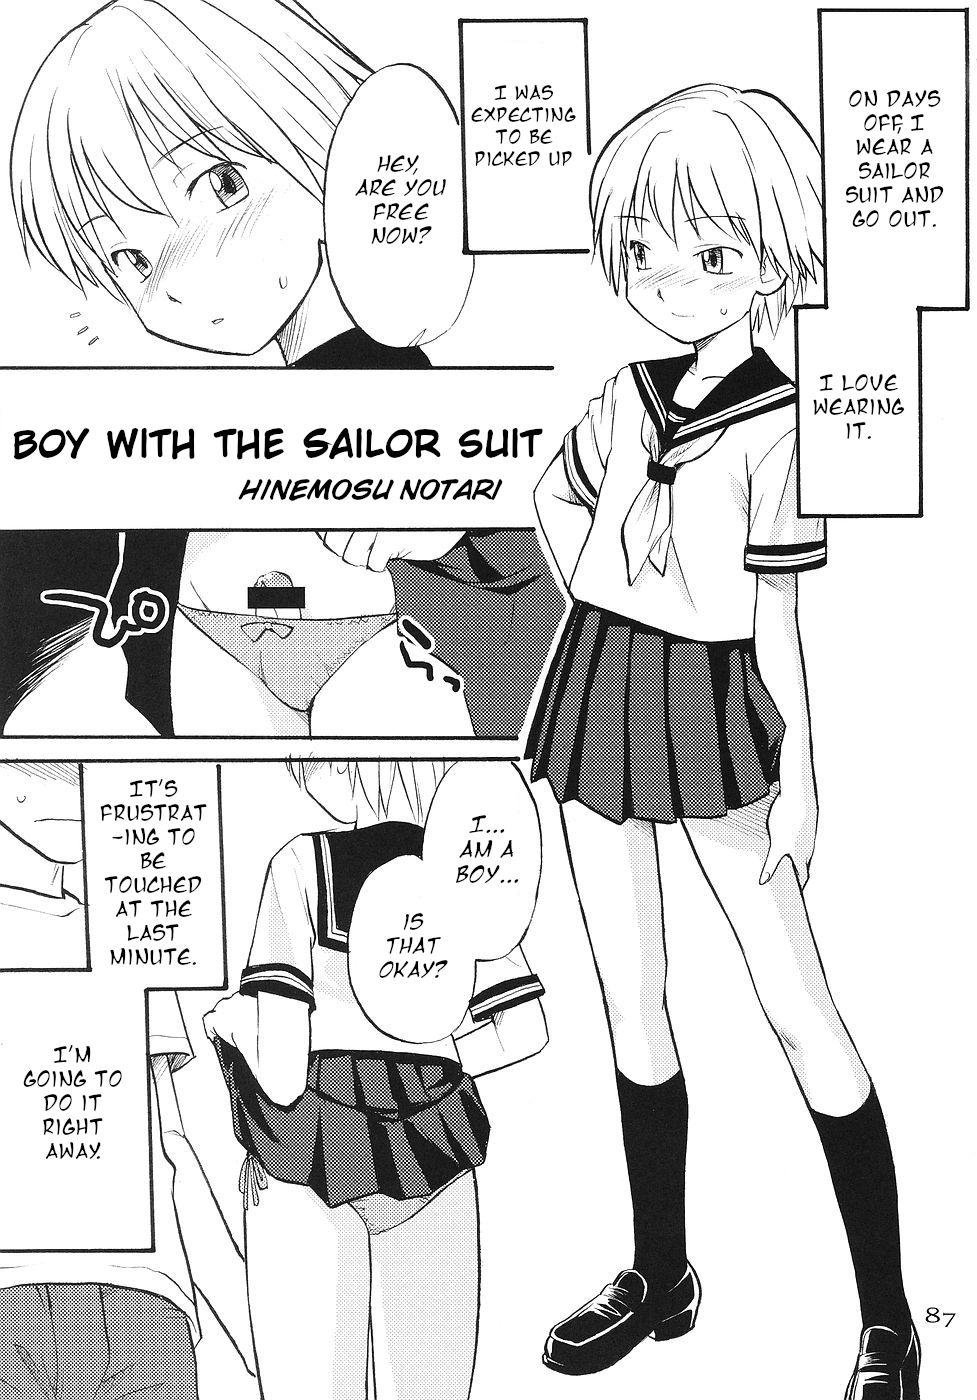 Boy with the Sailor Suit 0